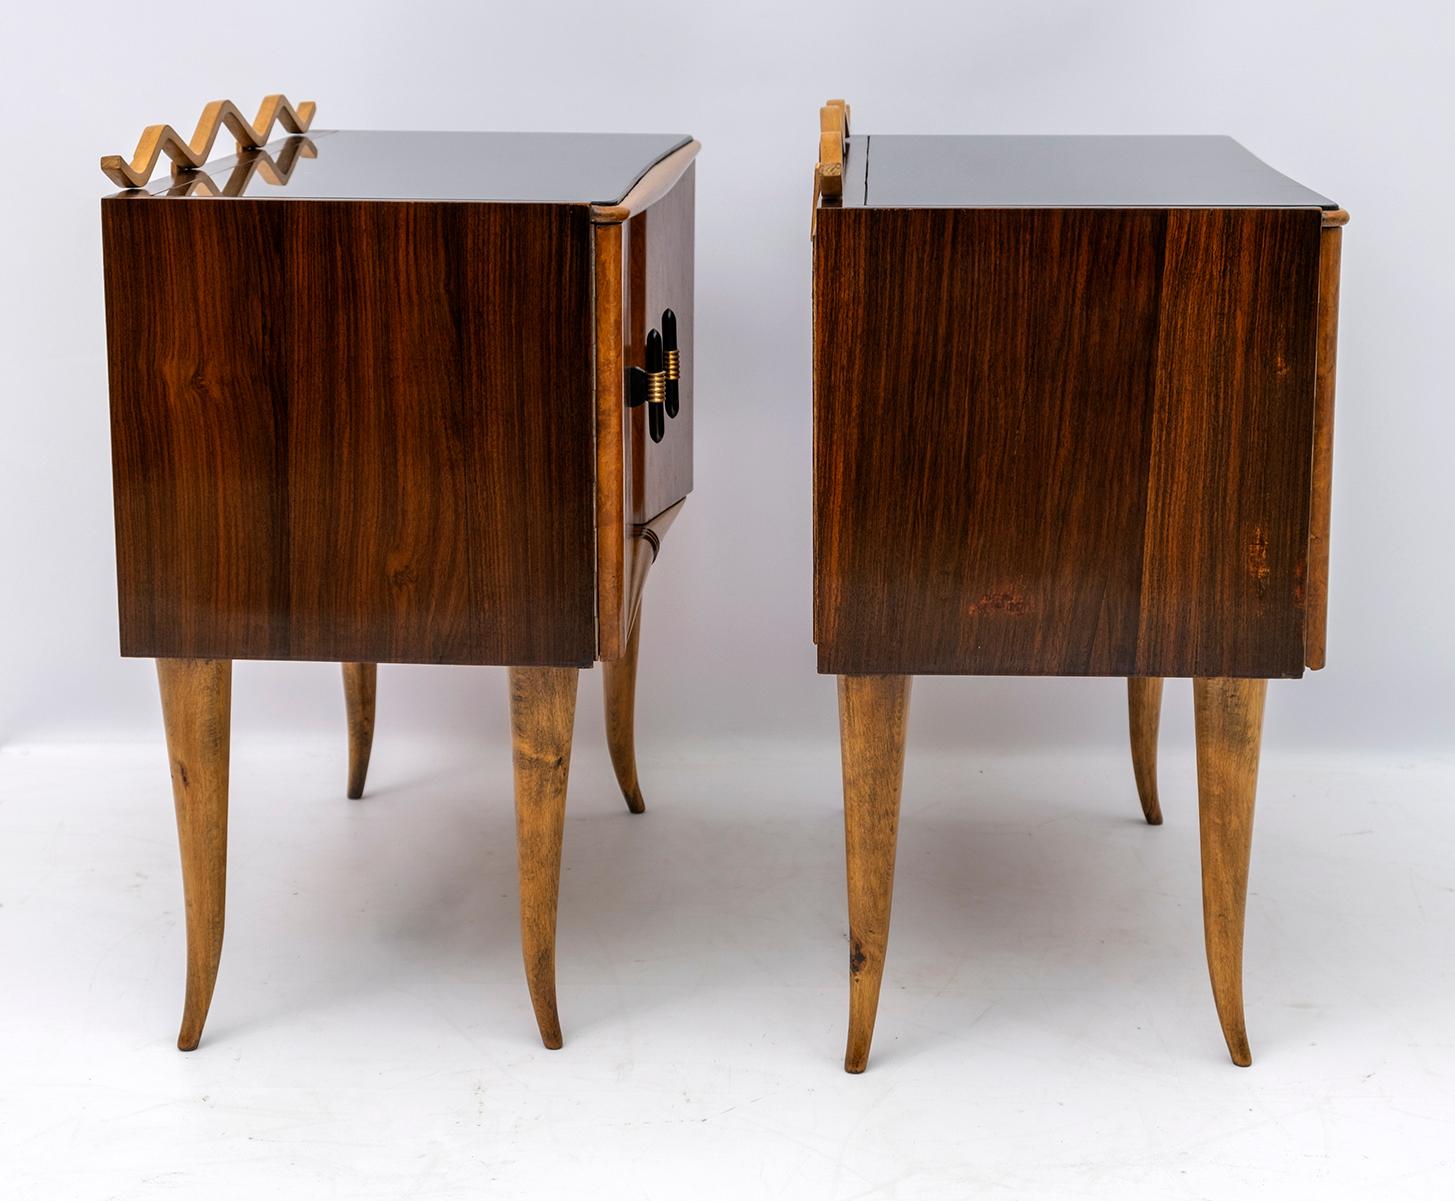 Early 20th Century Pair of Art Deco Italian Ash Briar and Walnut Bedside Tables, 1920s